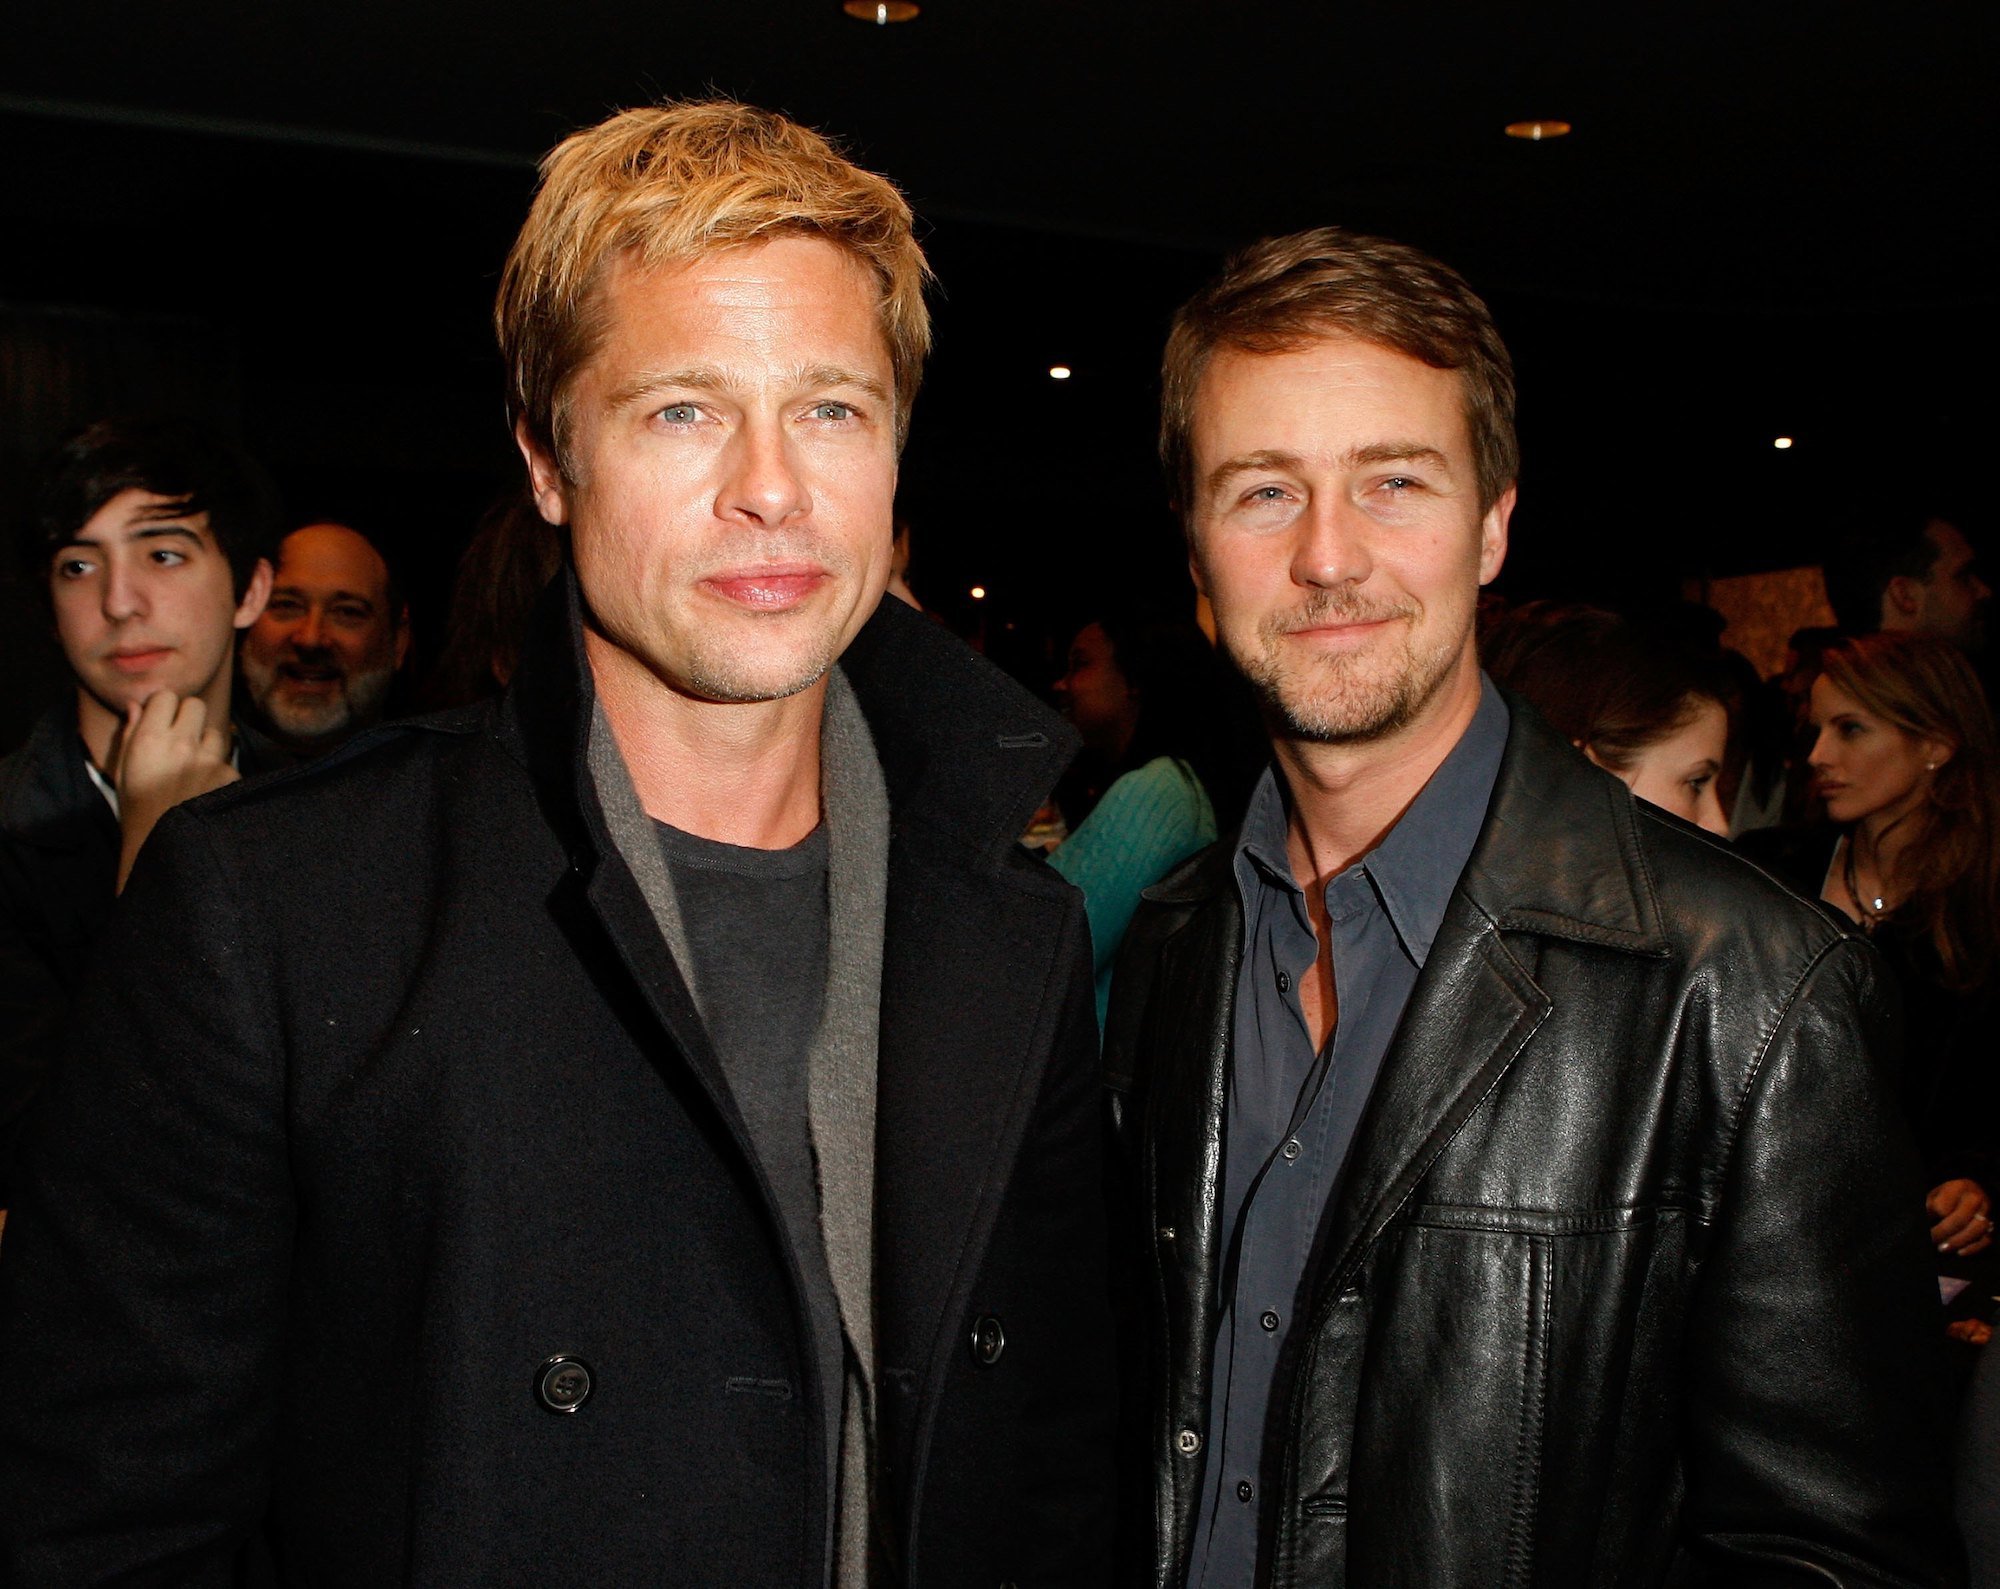 (L-R) Brad Pitt and Edward Norton smiling, looking to the right of the camera